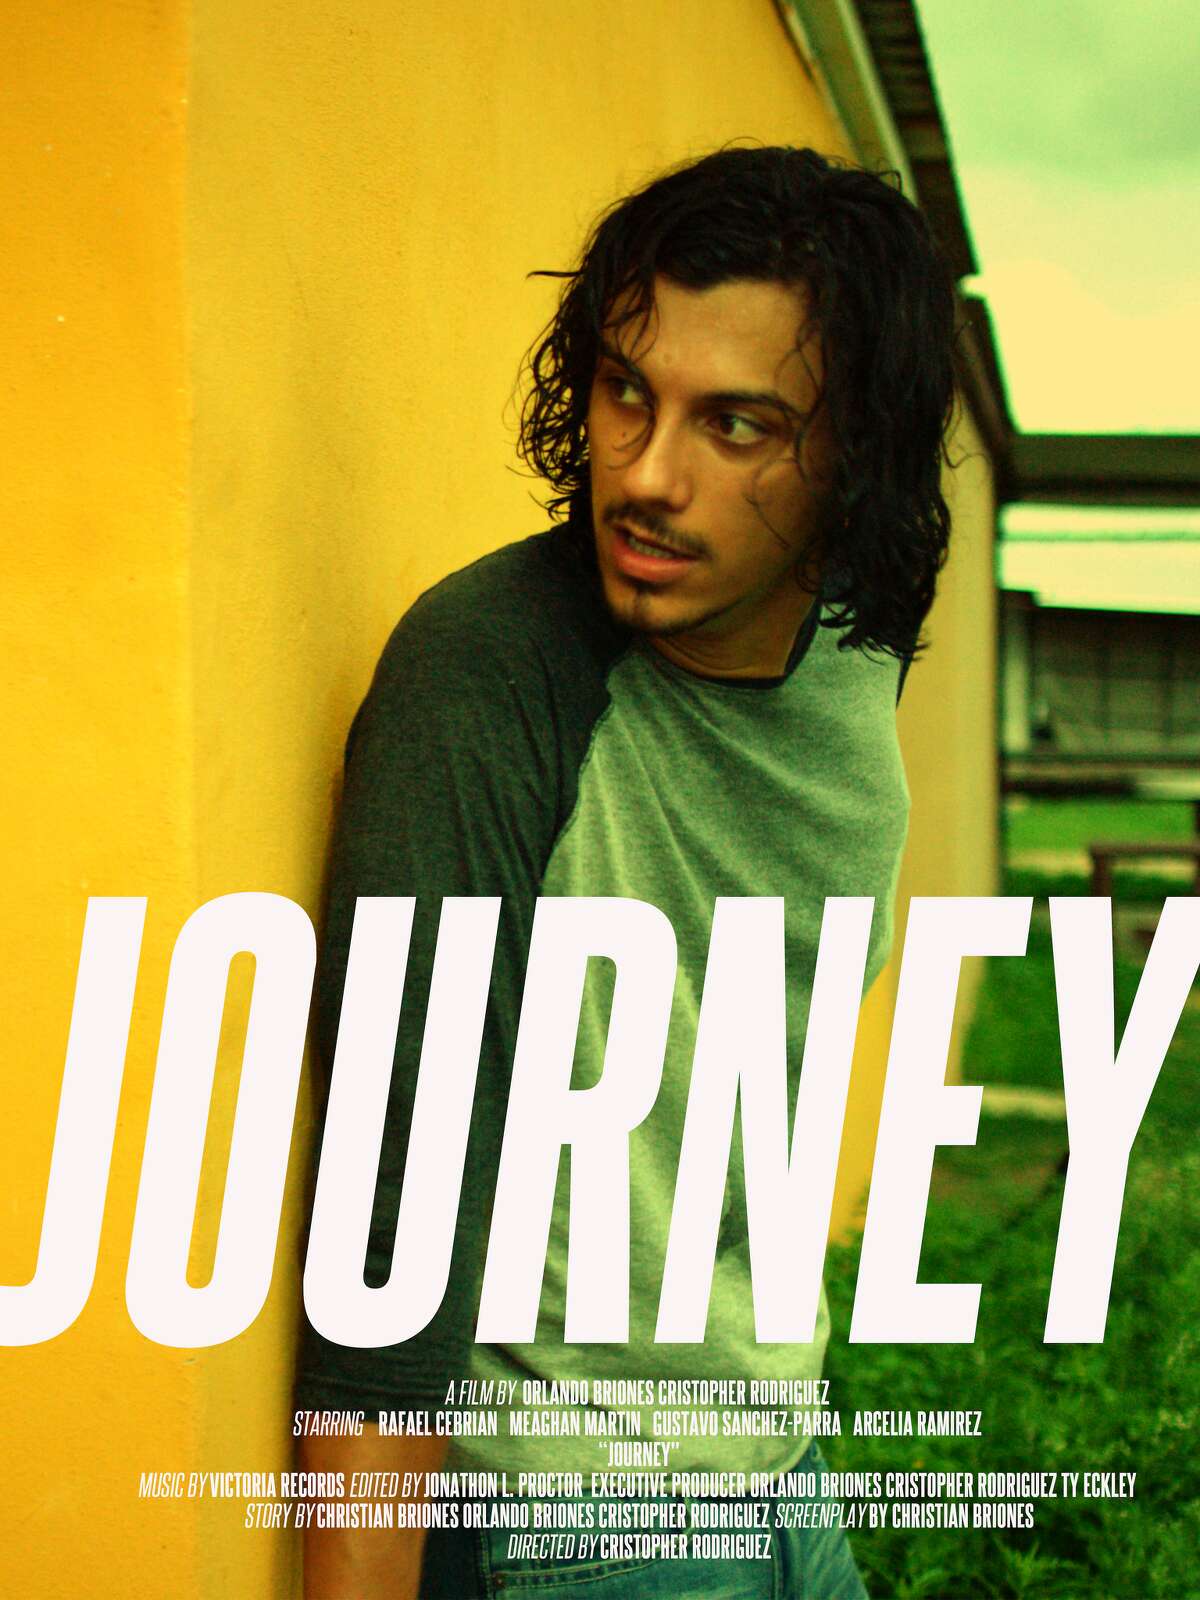 This photo shows the official film poster for "Journey." The film will be released on Vimeo on Sunday, April 30.